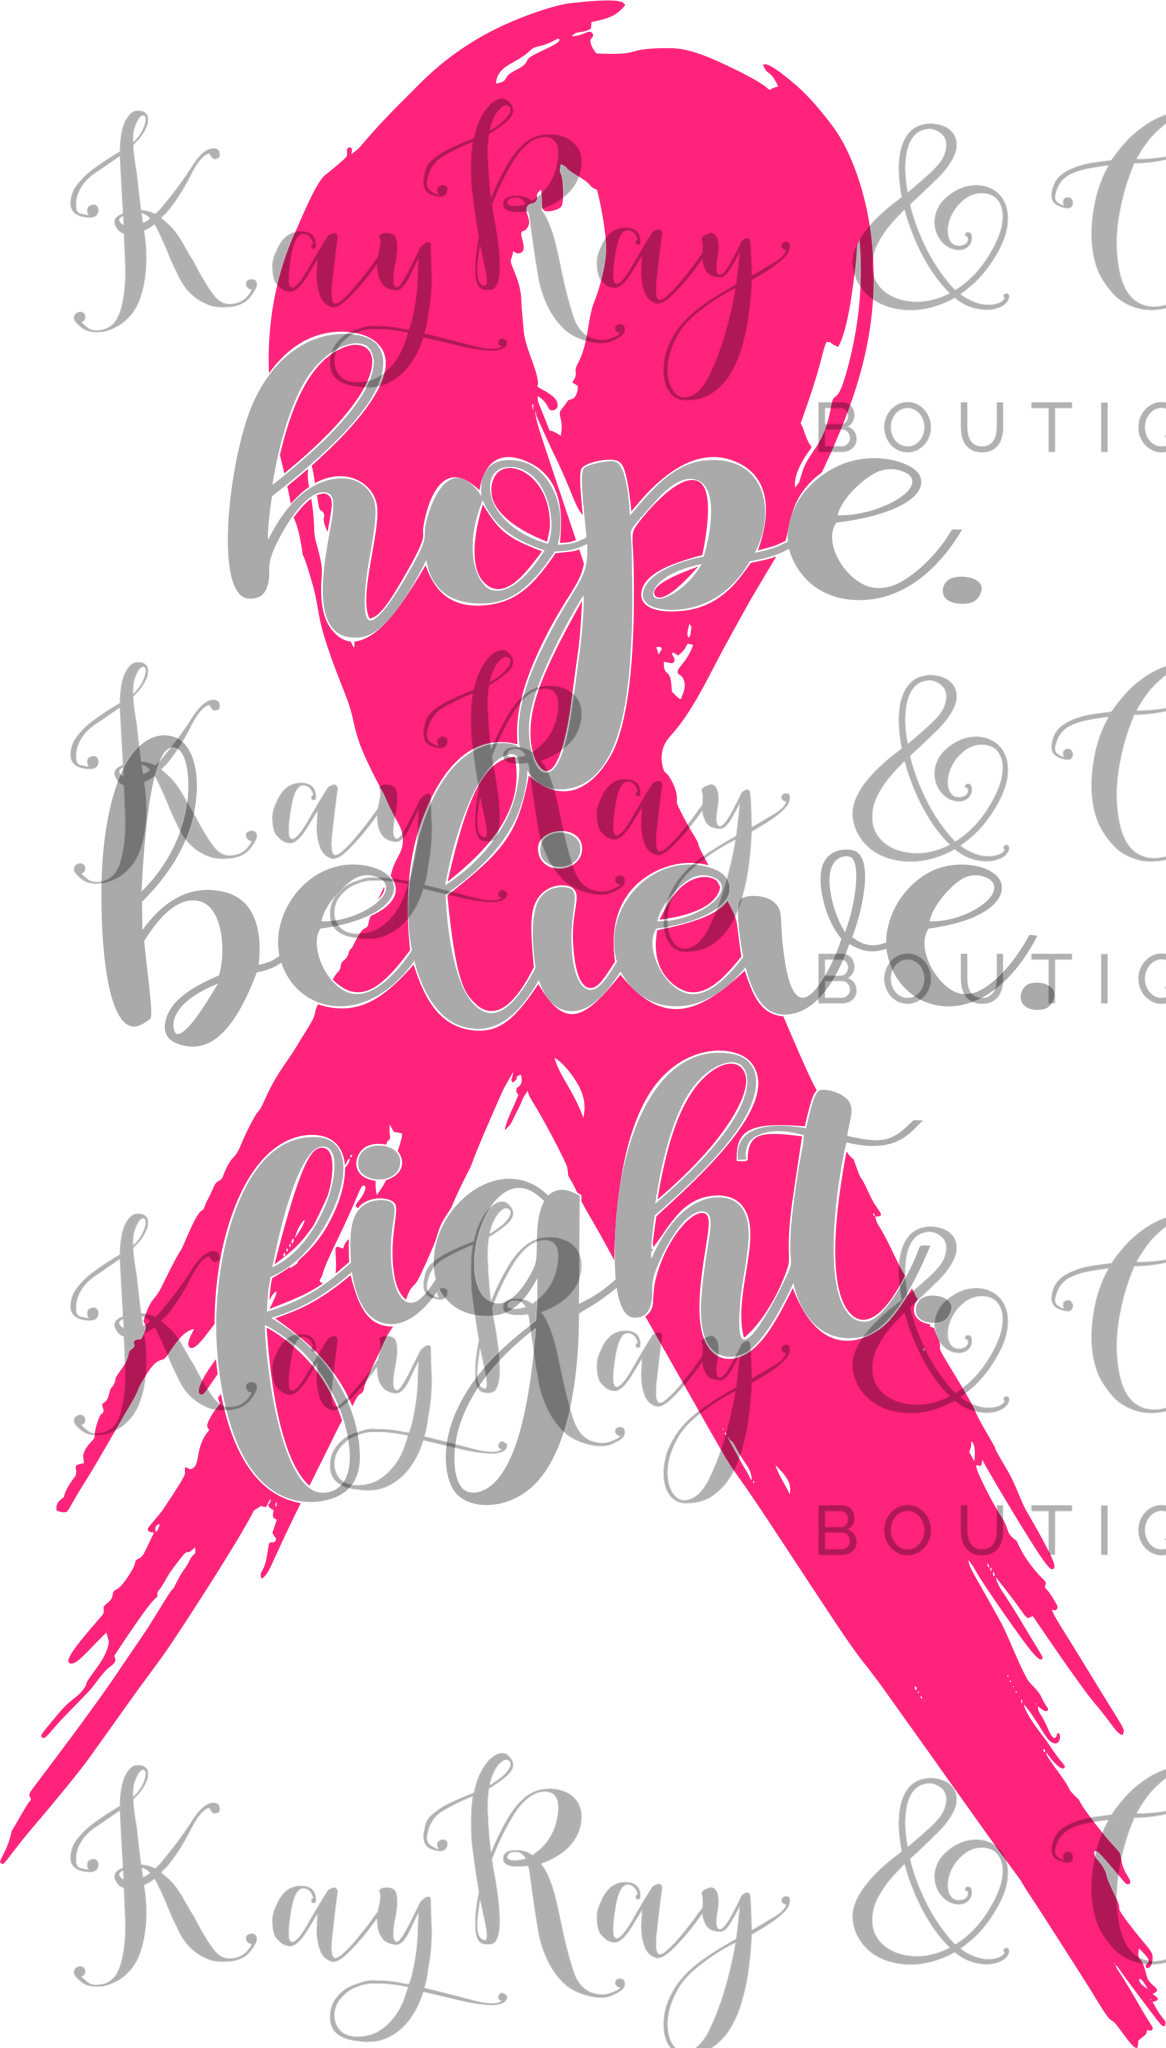 Hope, Believe & Fight Breast Cancer shirt